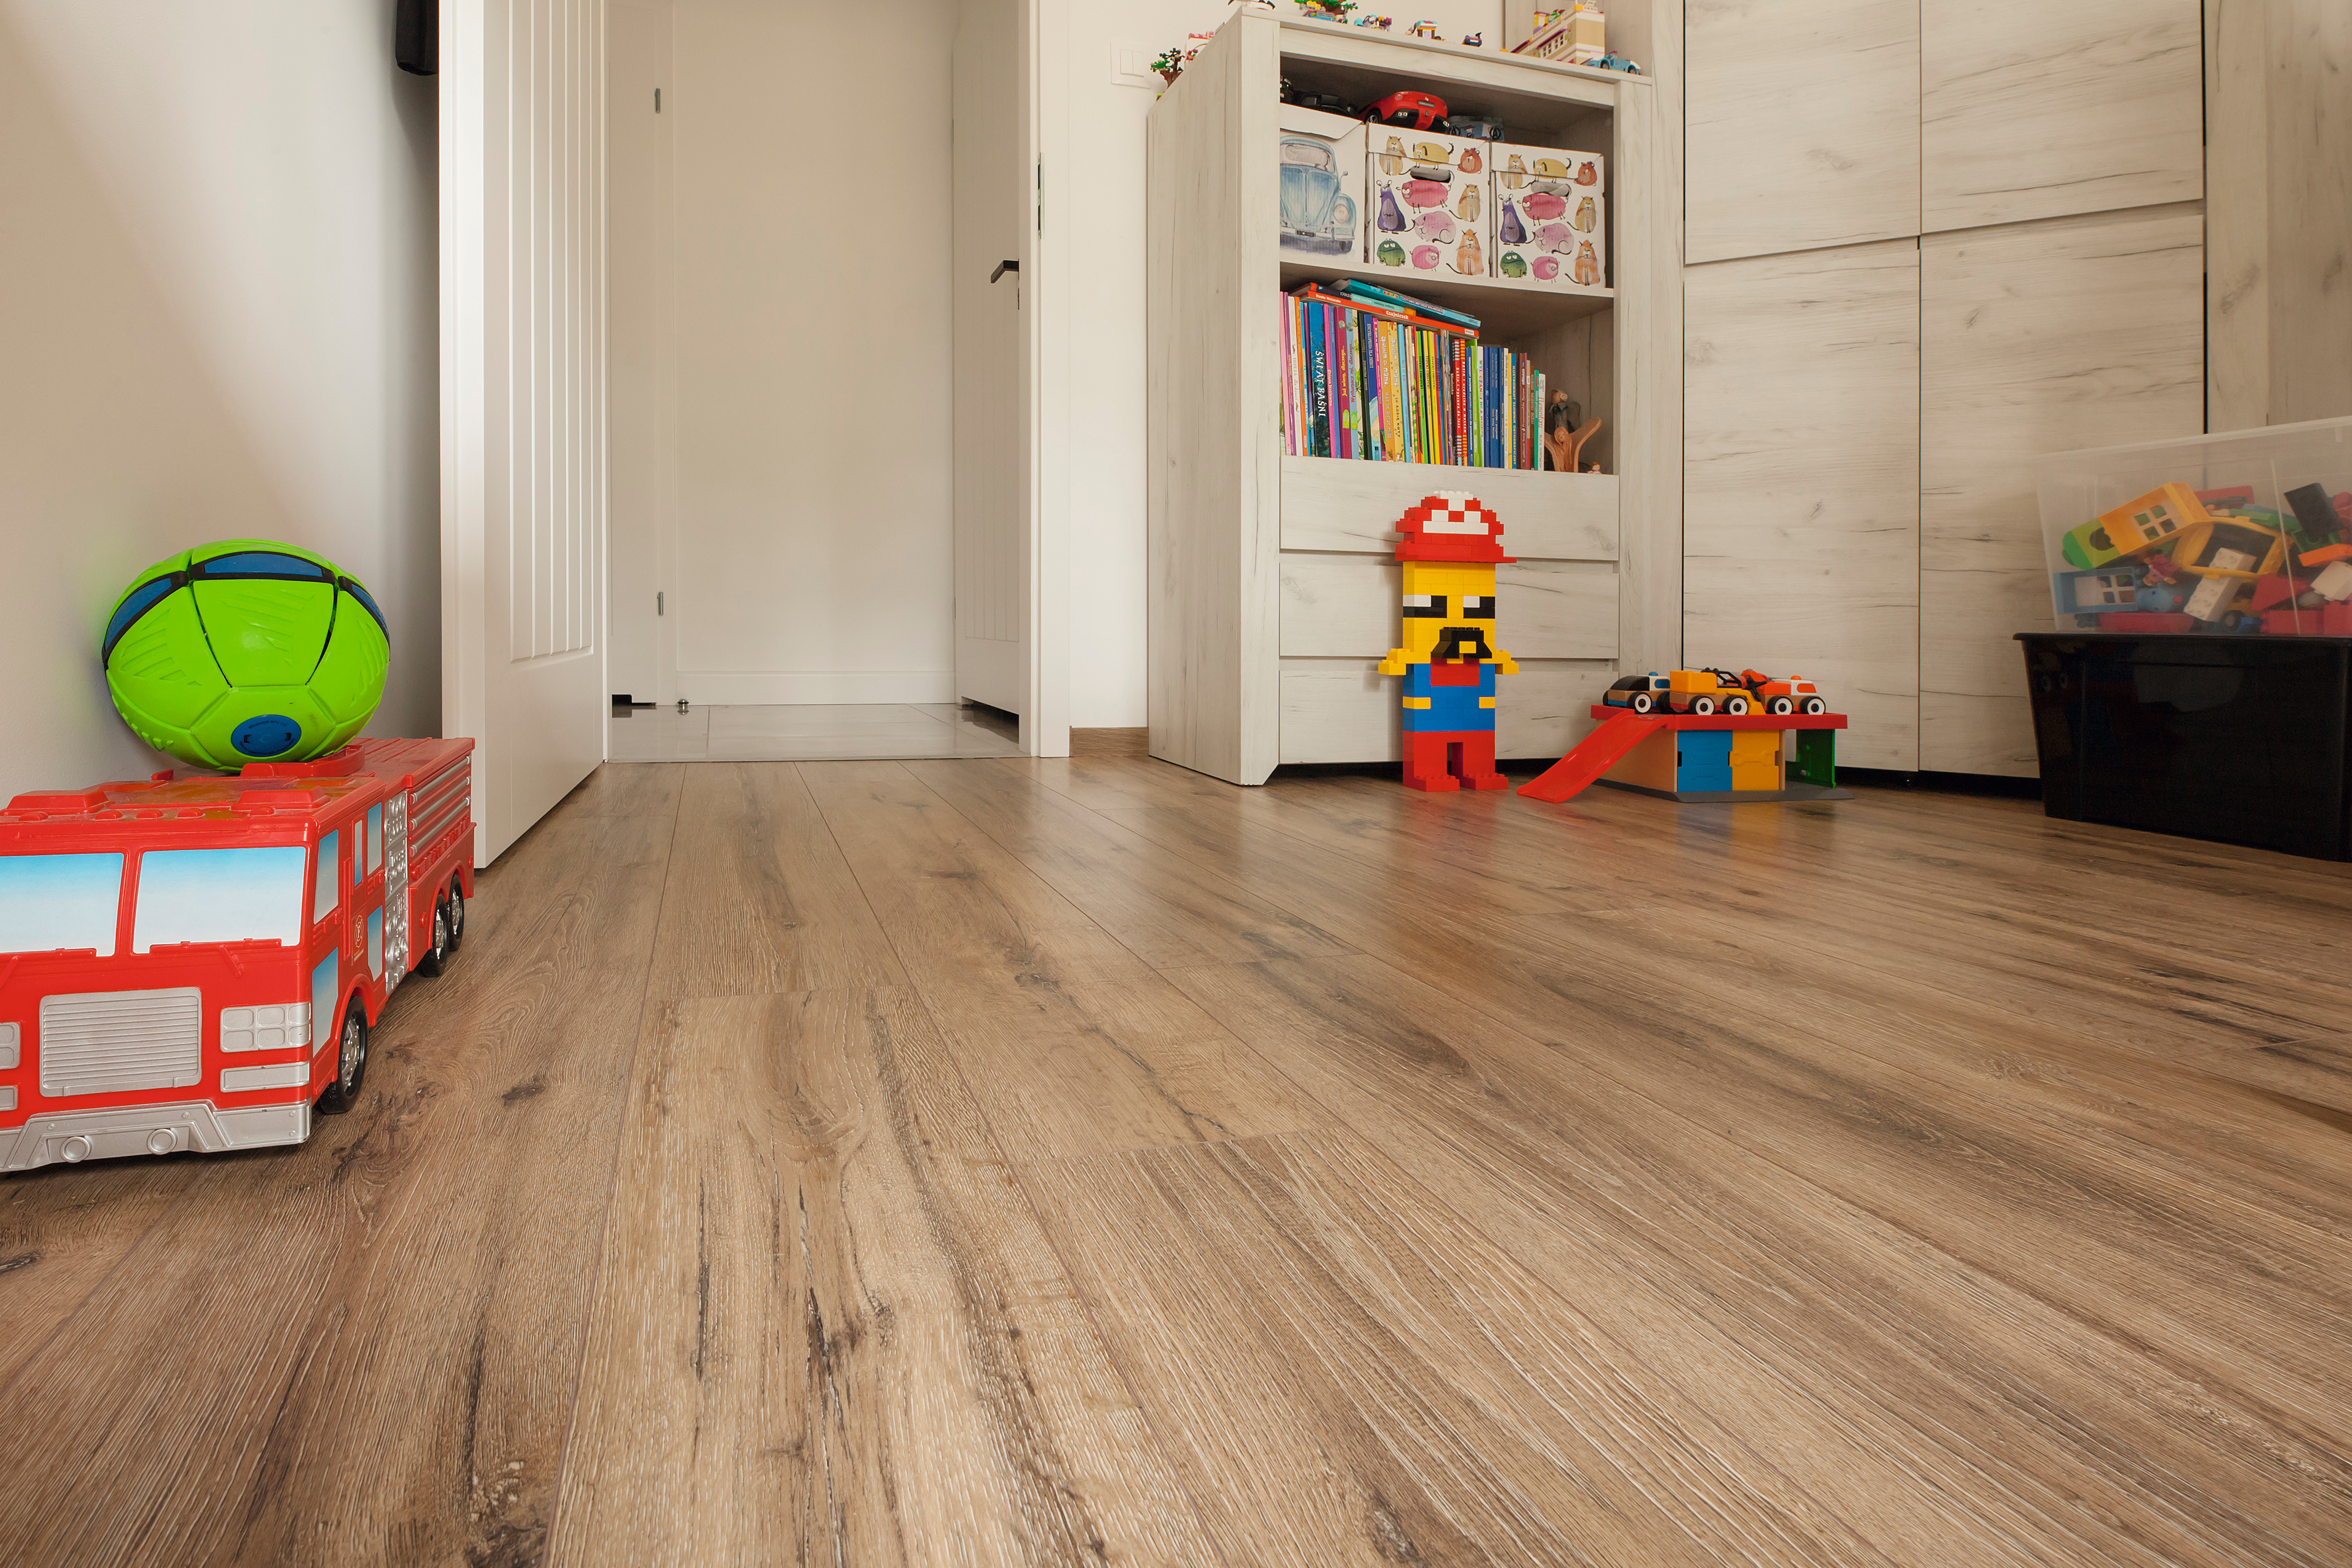 Thanks to its wear resistance, this floor is perfect for the children’s room.